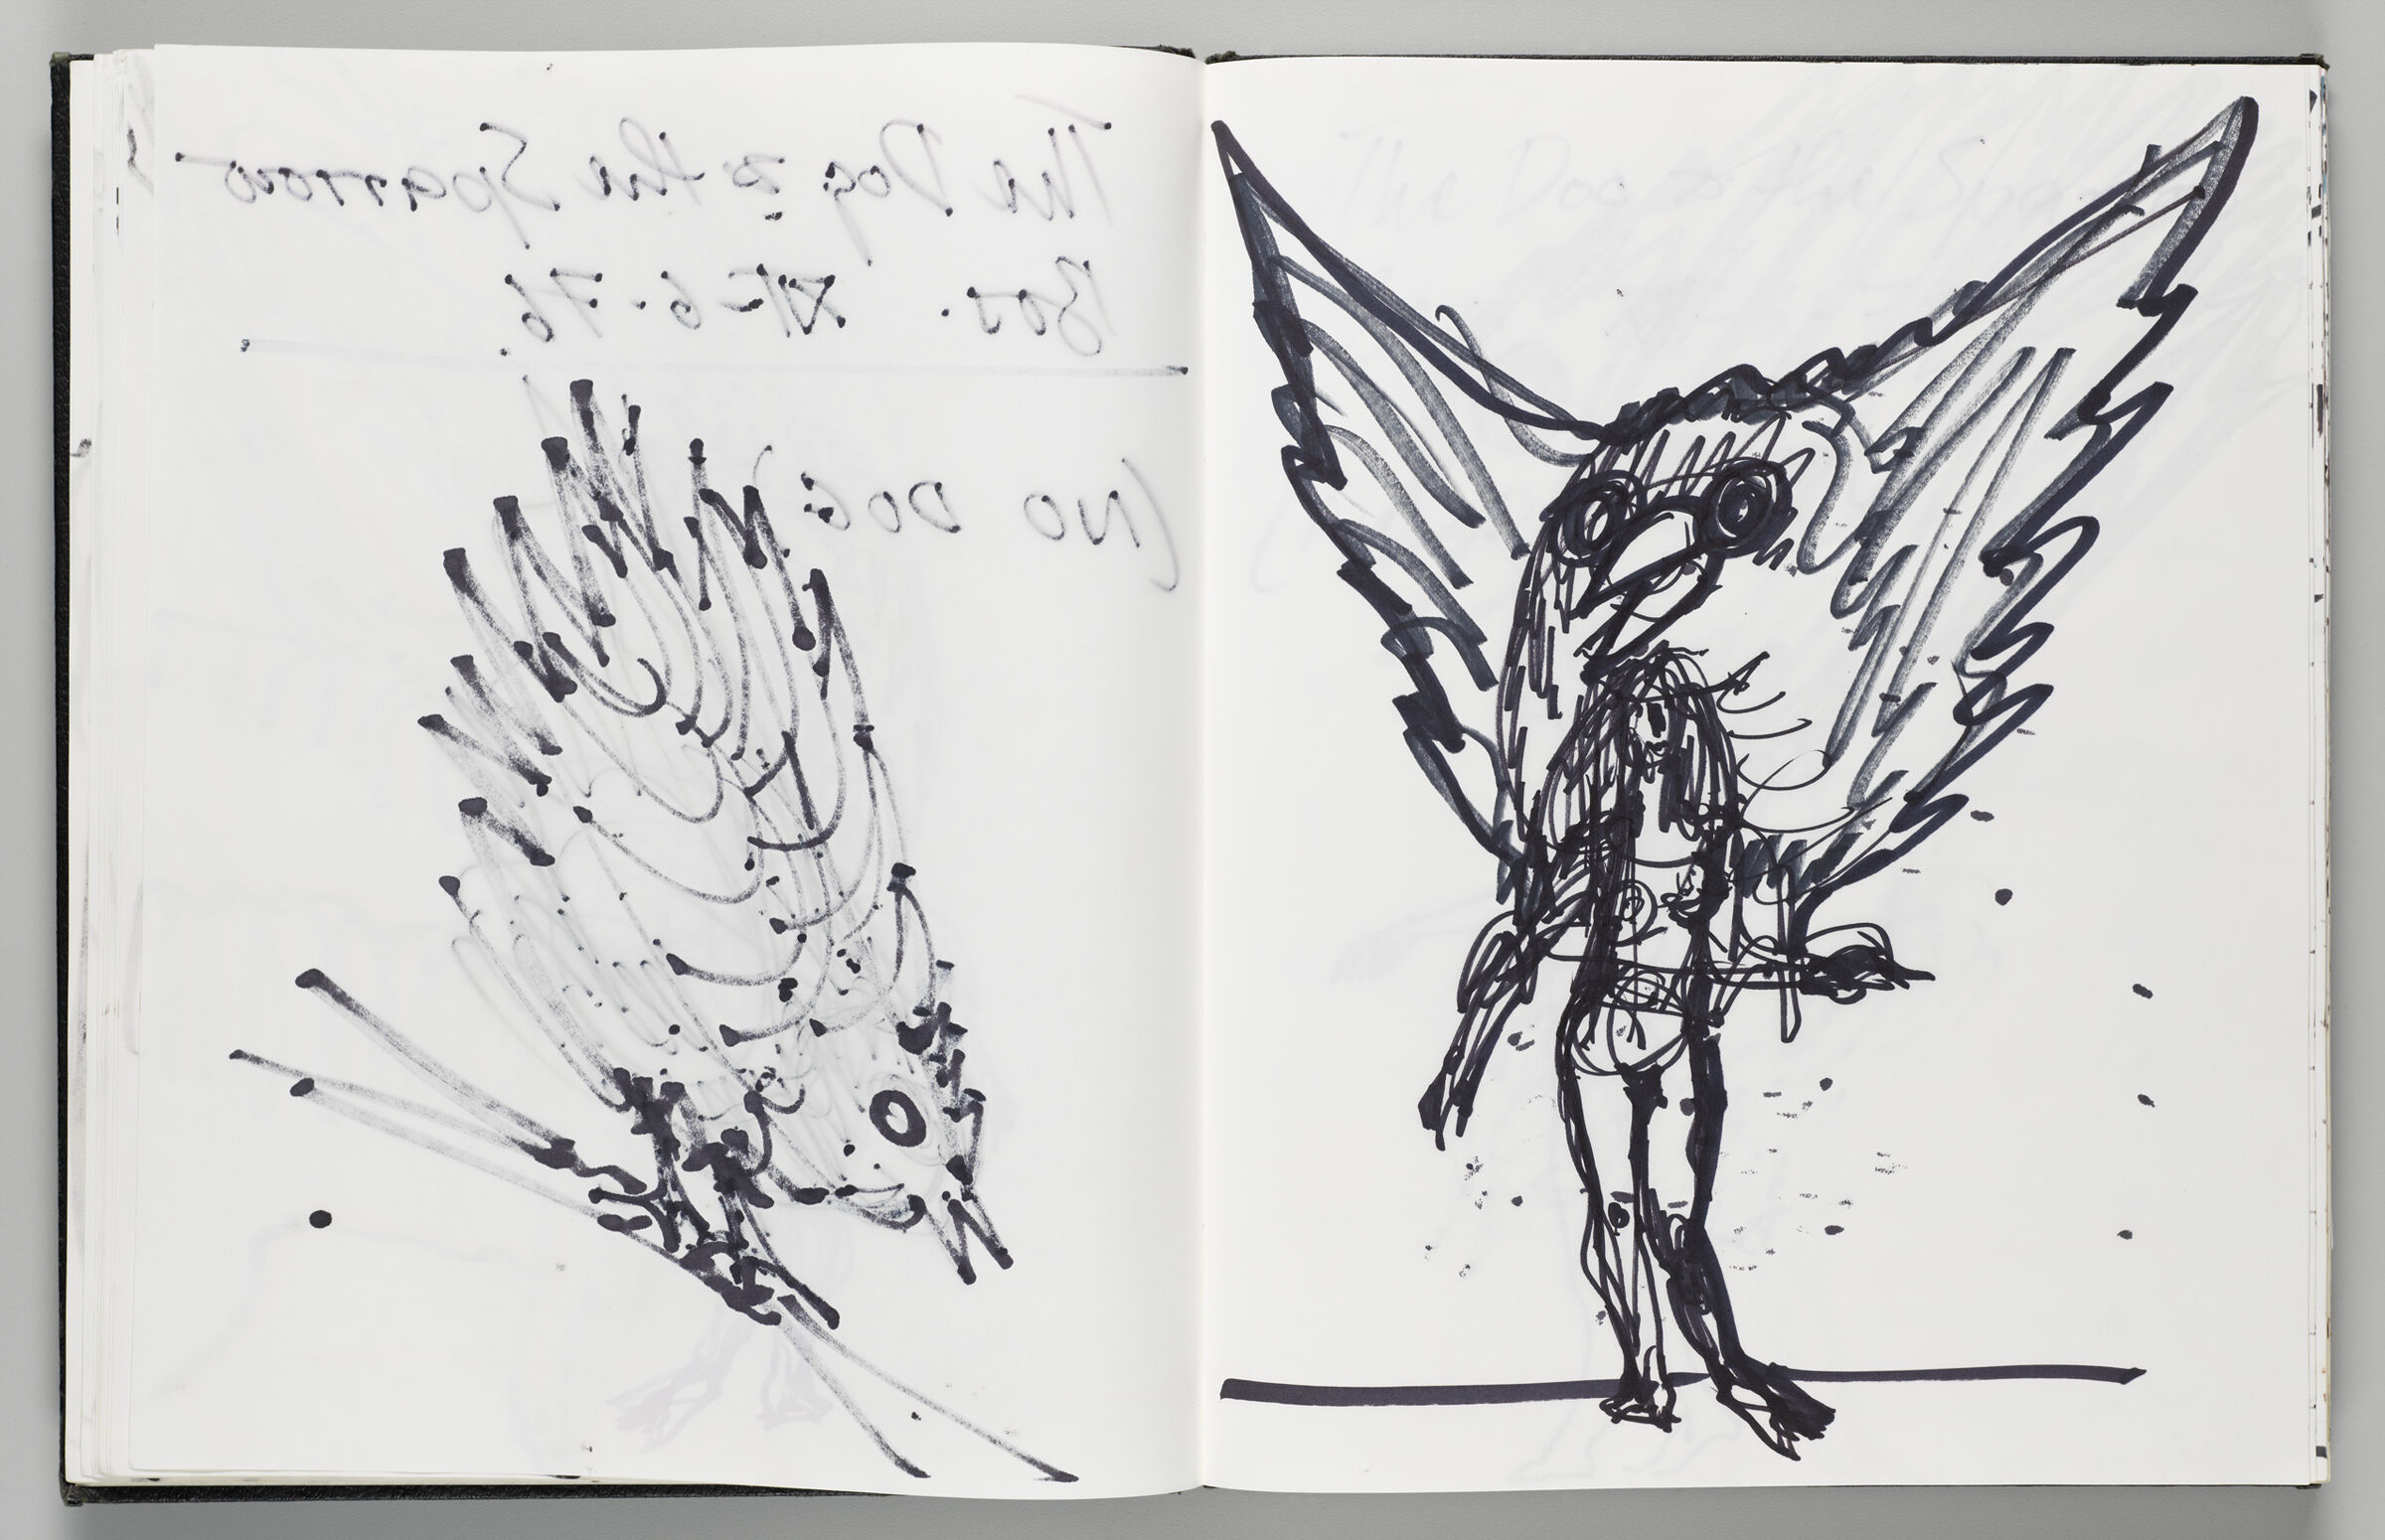 Untitled (Bleed-Through Of Previous Page, Left Page); Untitled (Sparrow Headpiece On Figure, Right Page)